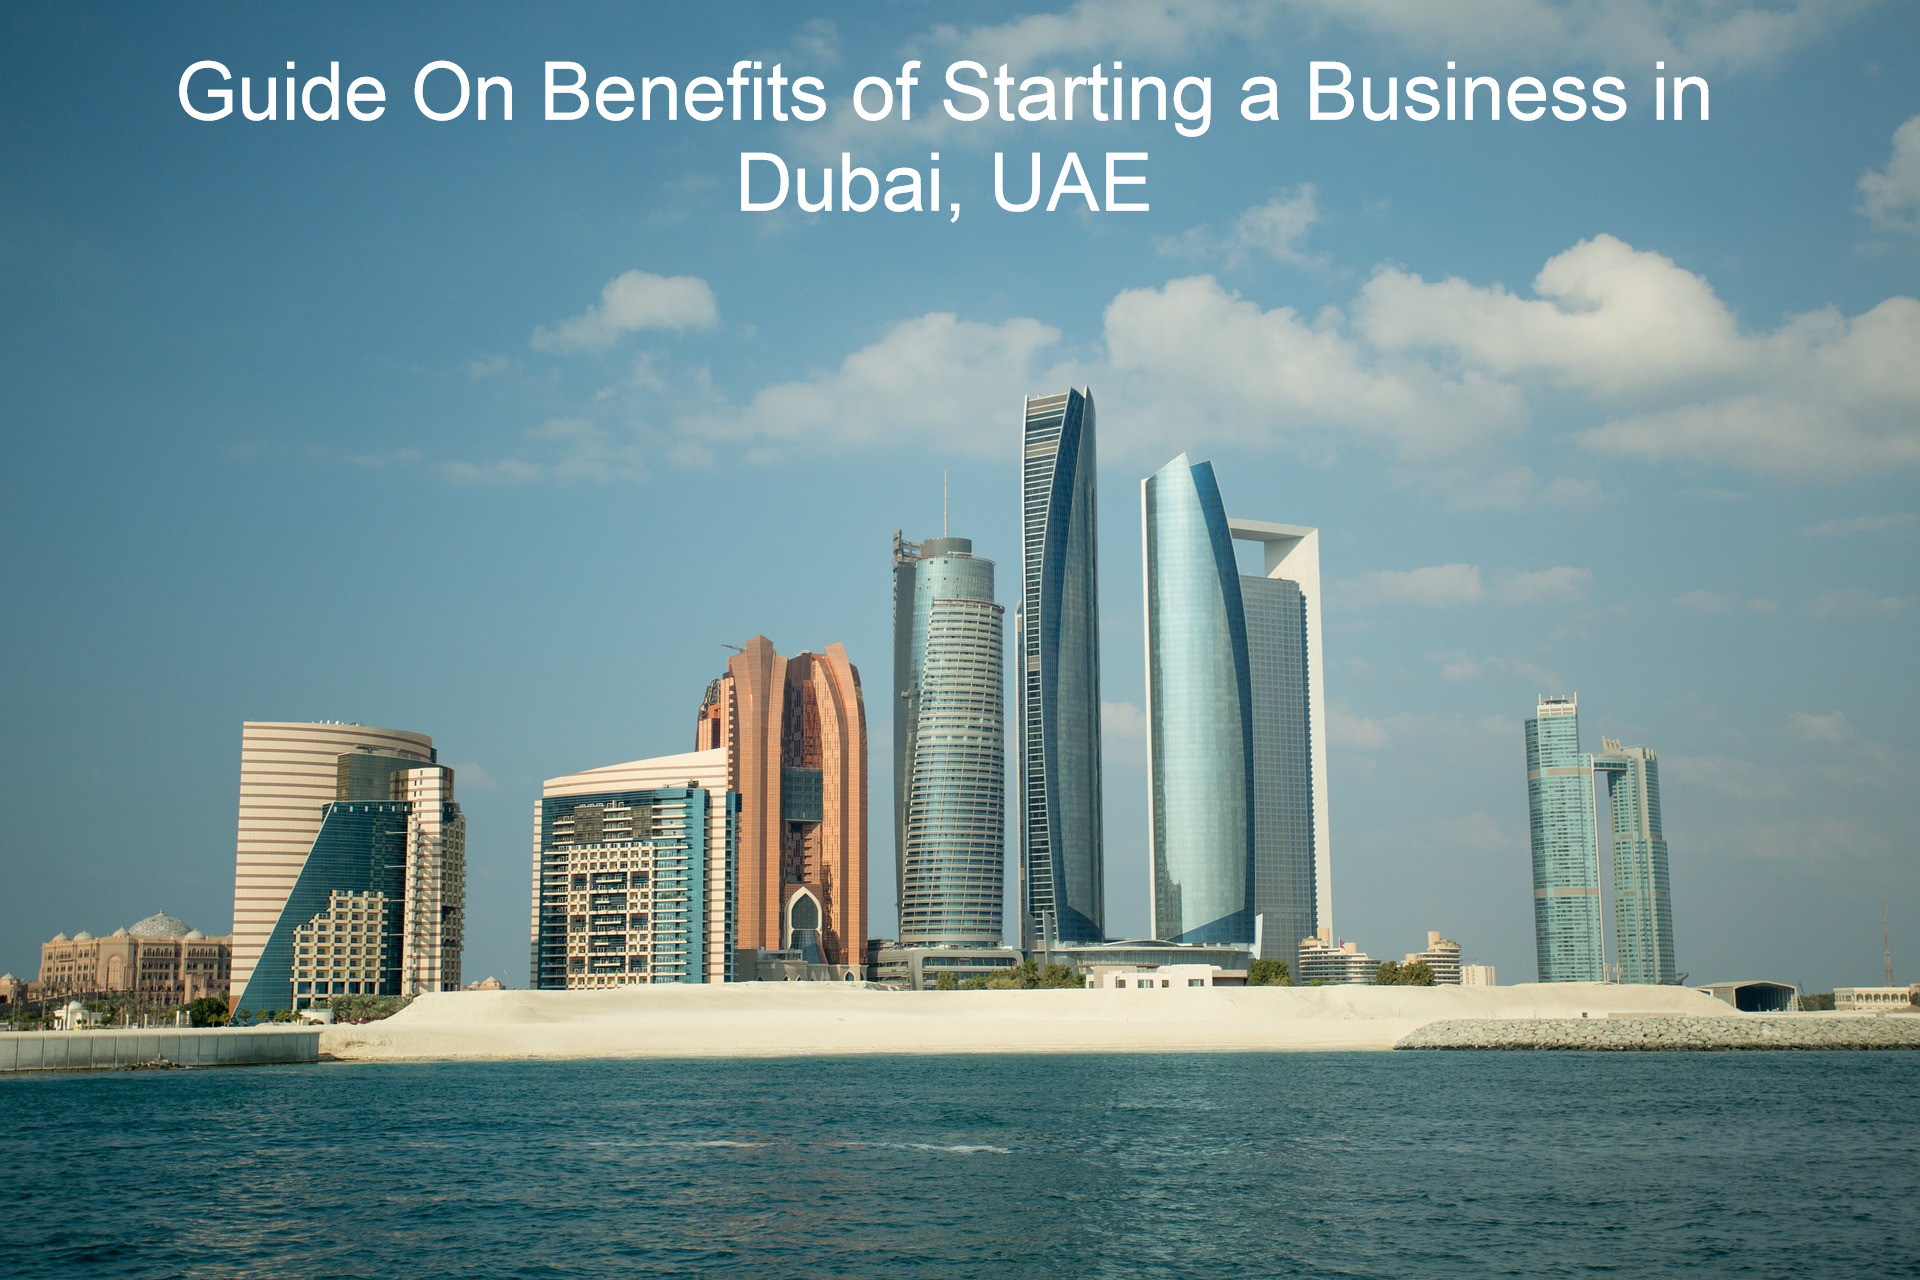 Guide On Benefits of Starting a Business in Dubai, UAE